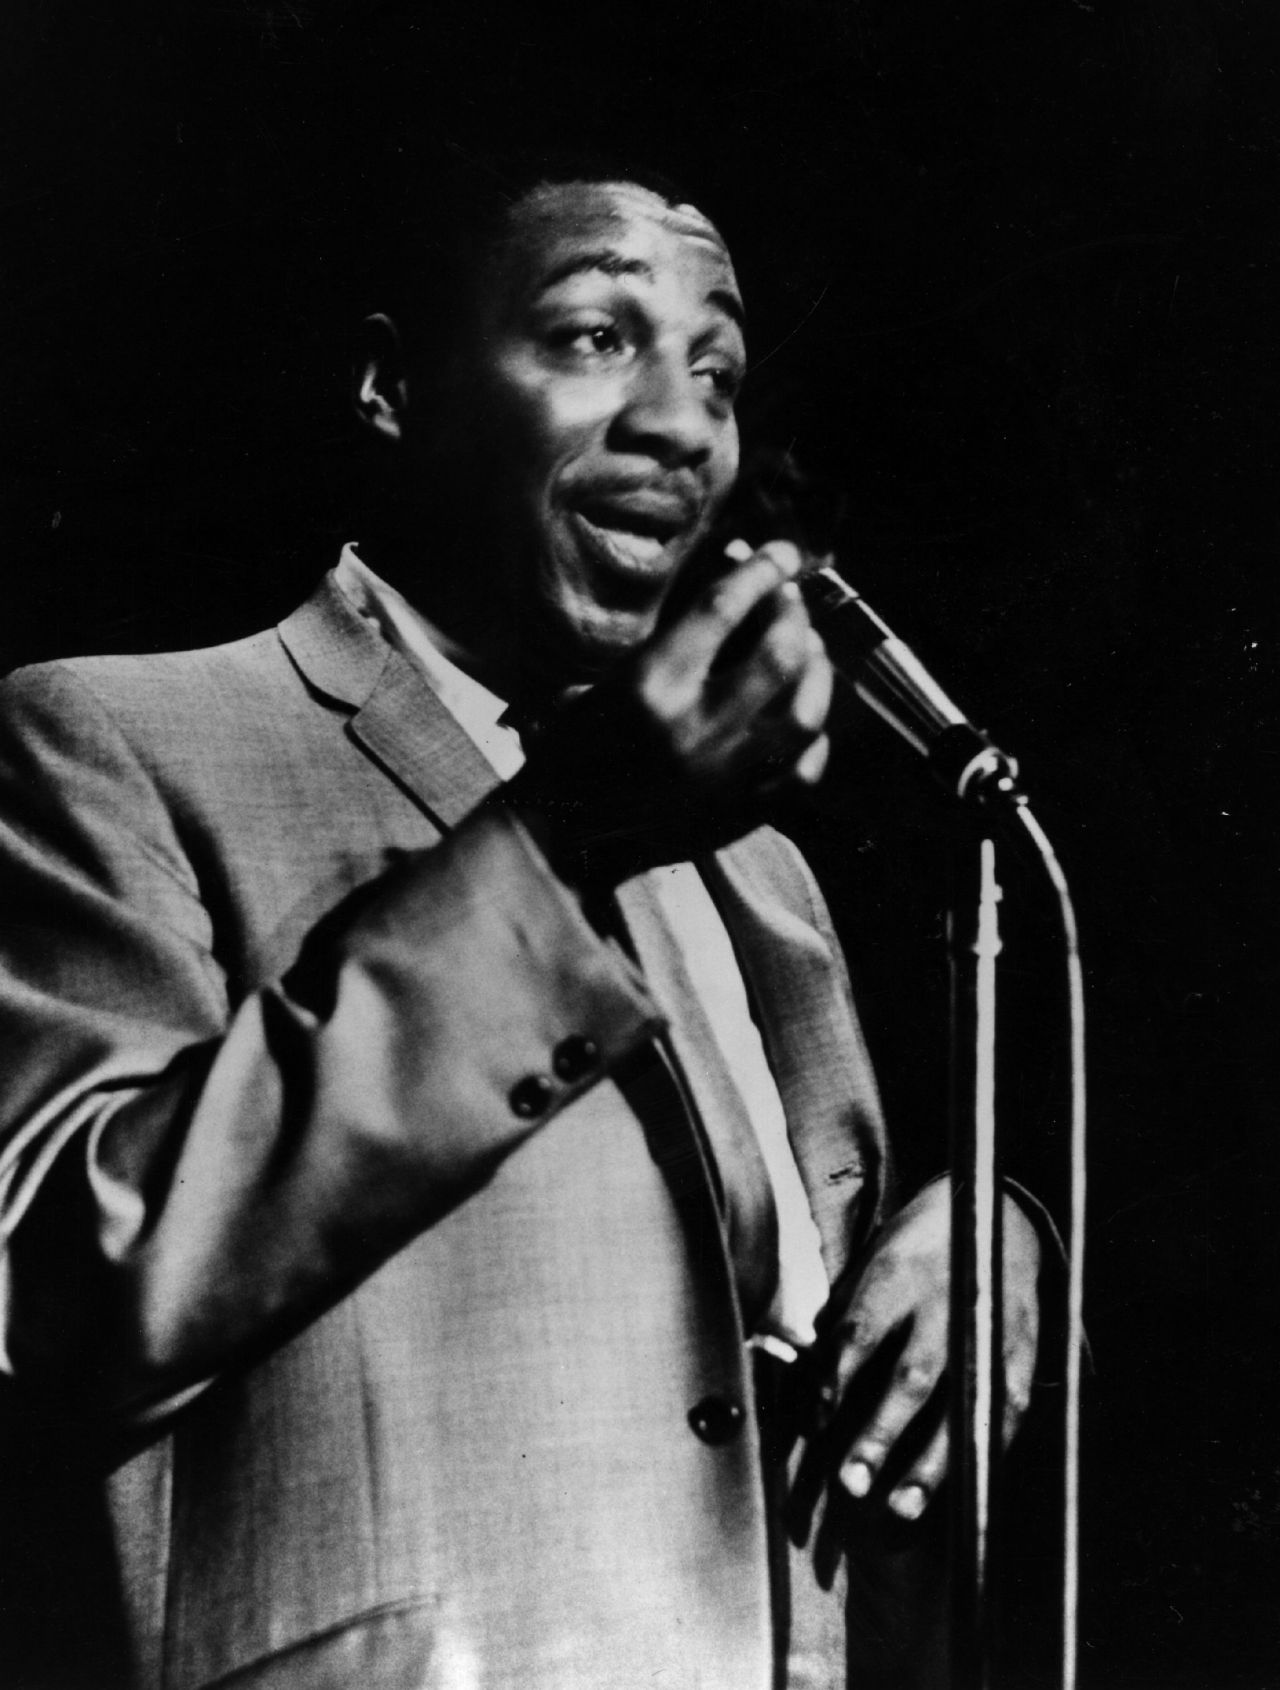 Comedian and civil rights activist <a href="http://www.cnn.com/2017/08/19/entertainment/dick-gregory-obit/index.html" target="_blank">Dick Gregory</a>, who broke barriers in the 1960s and became one of the first African-Americans to perform at white clubs, died on August 19. He was 84.